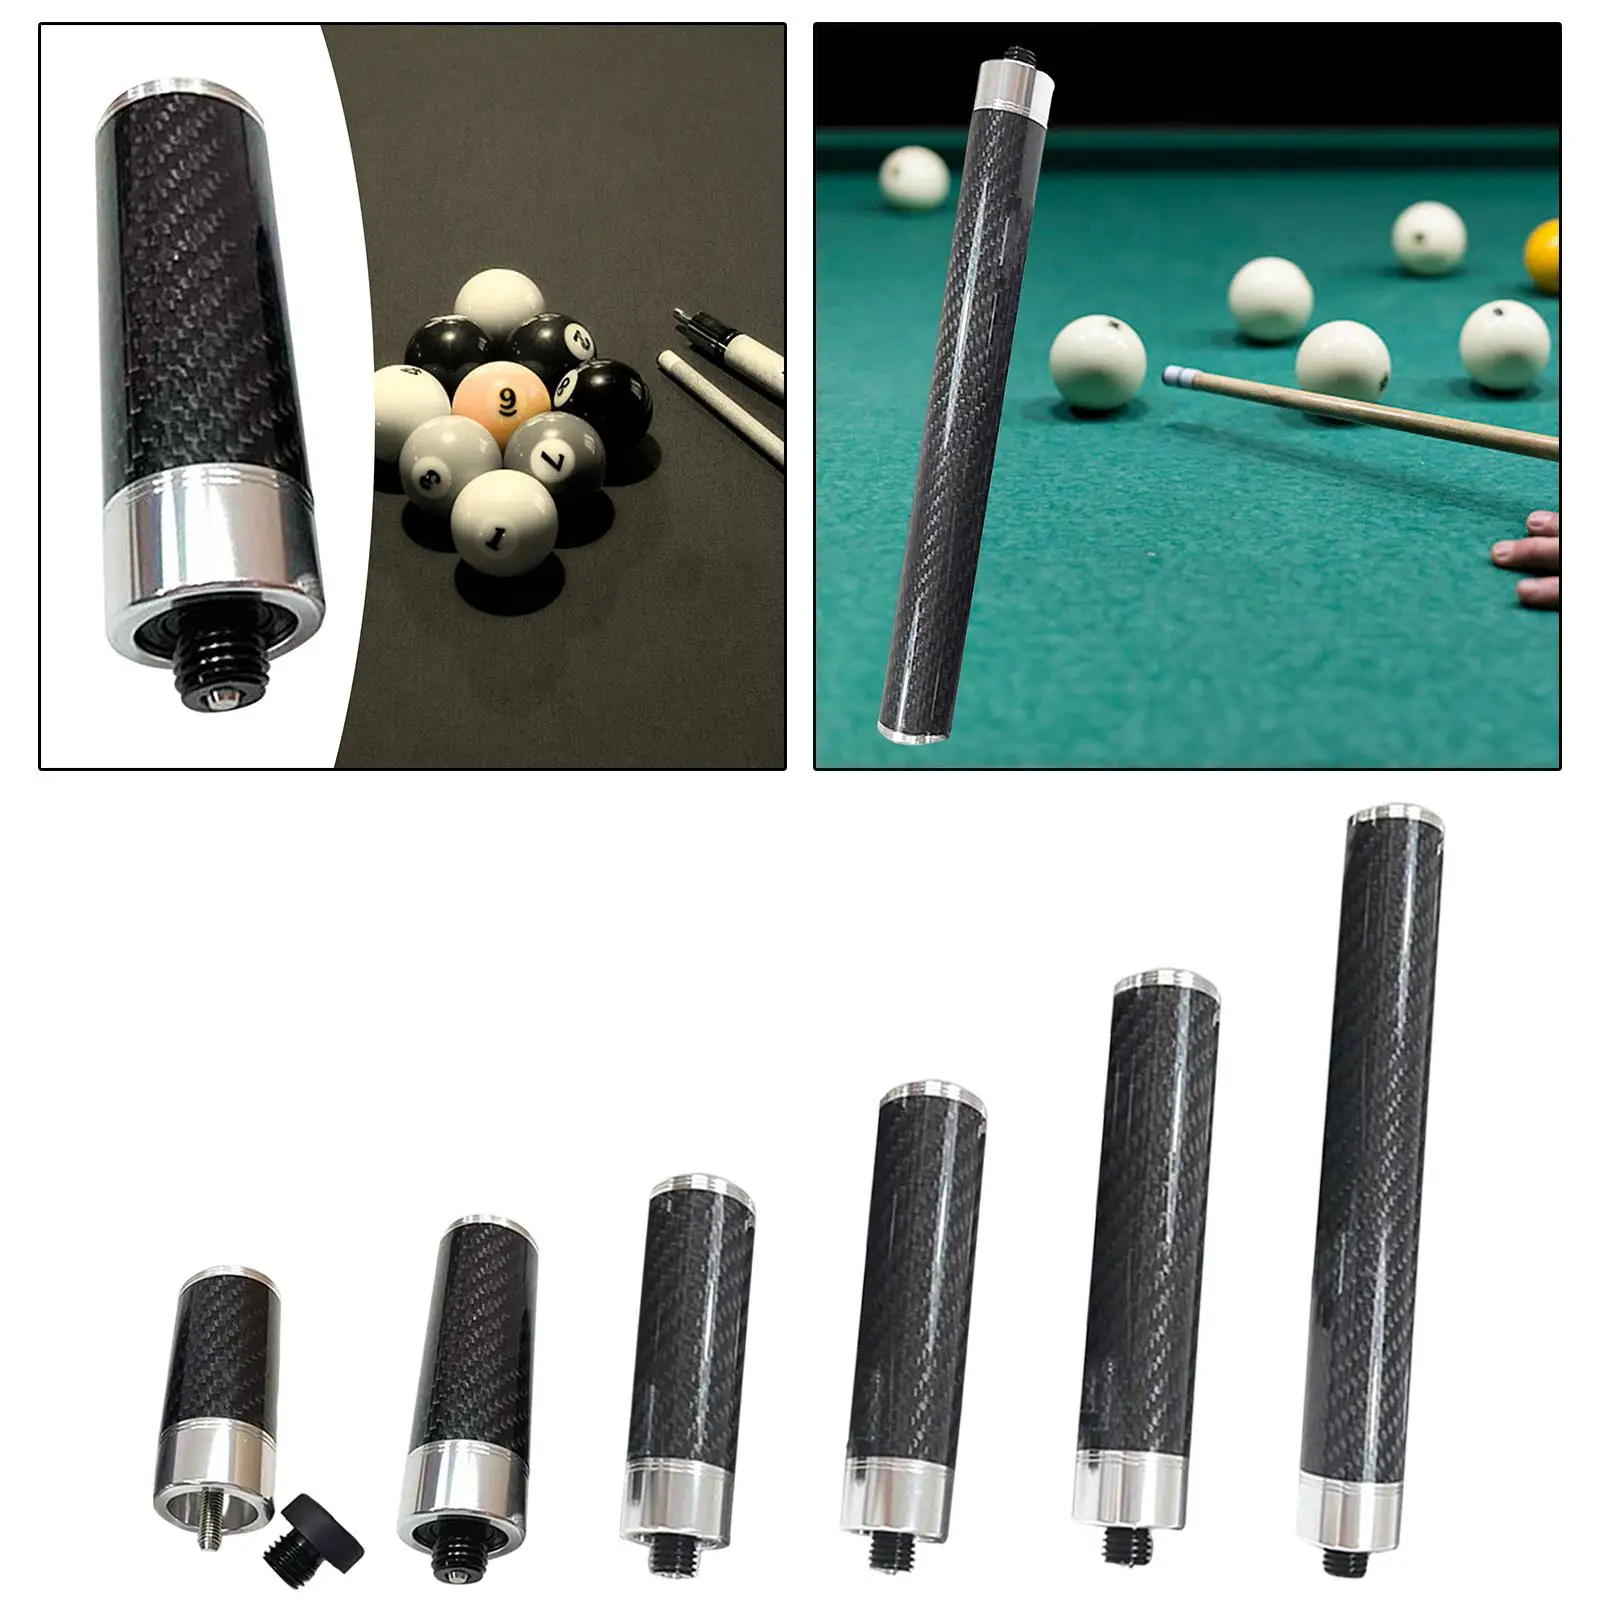 Cue End Extender with Bumper Attachment Billiards Pool Cue Extension Snooker Cue Stick for Lovers Trainer Entertainment Athlete